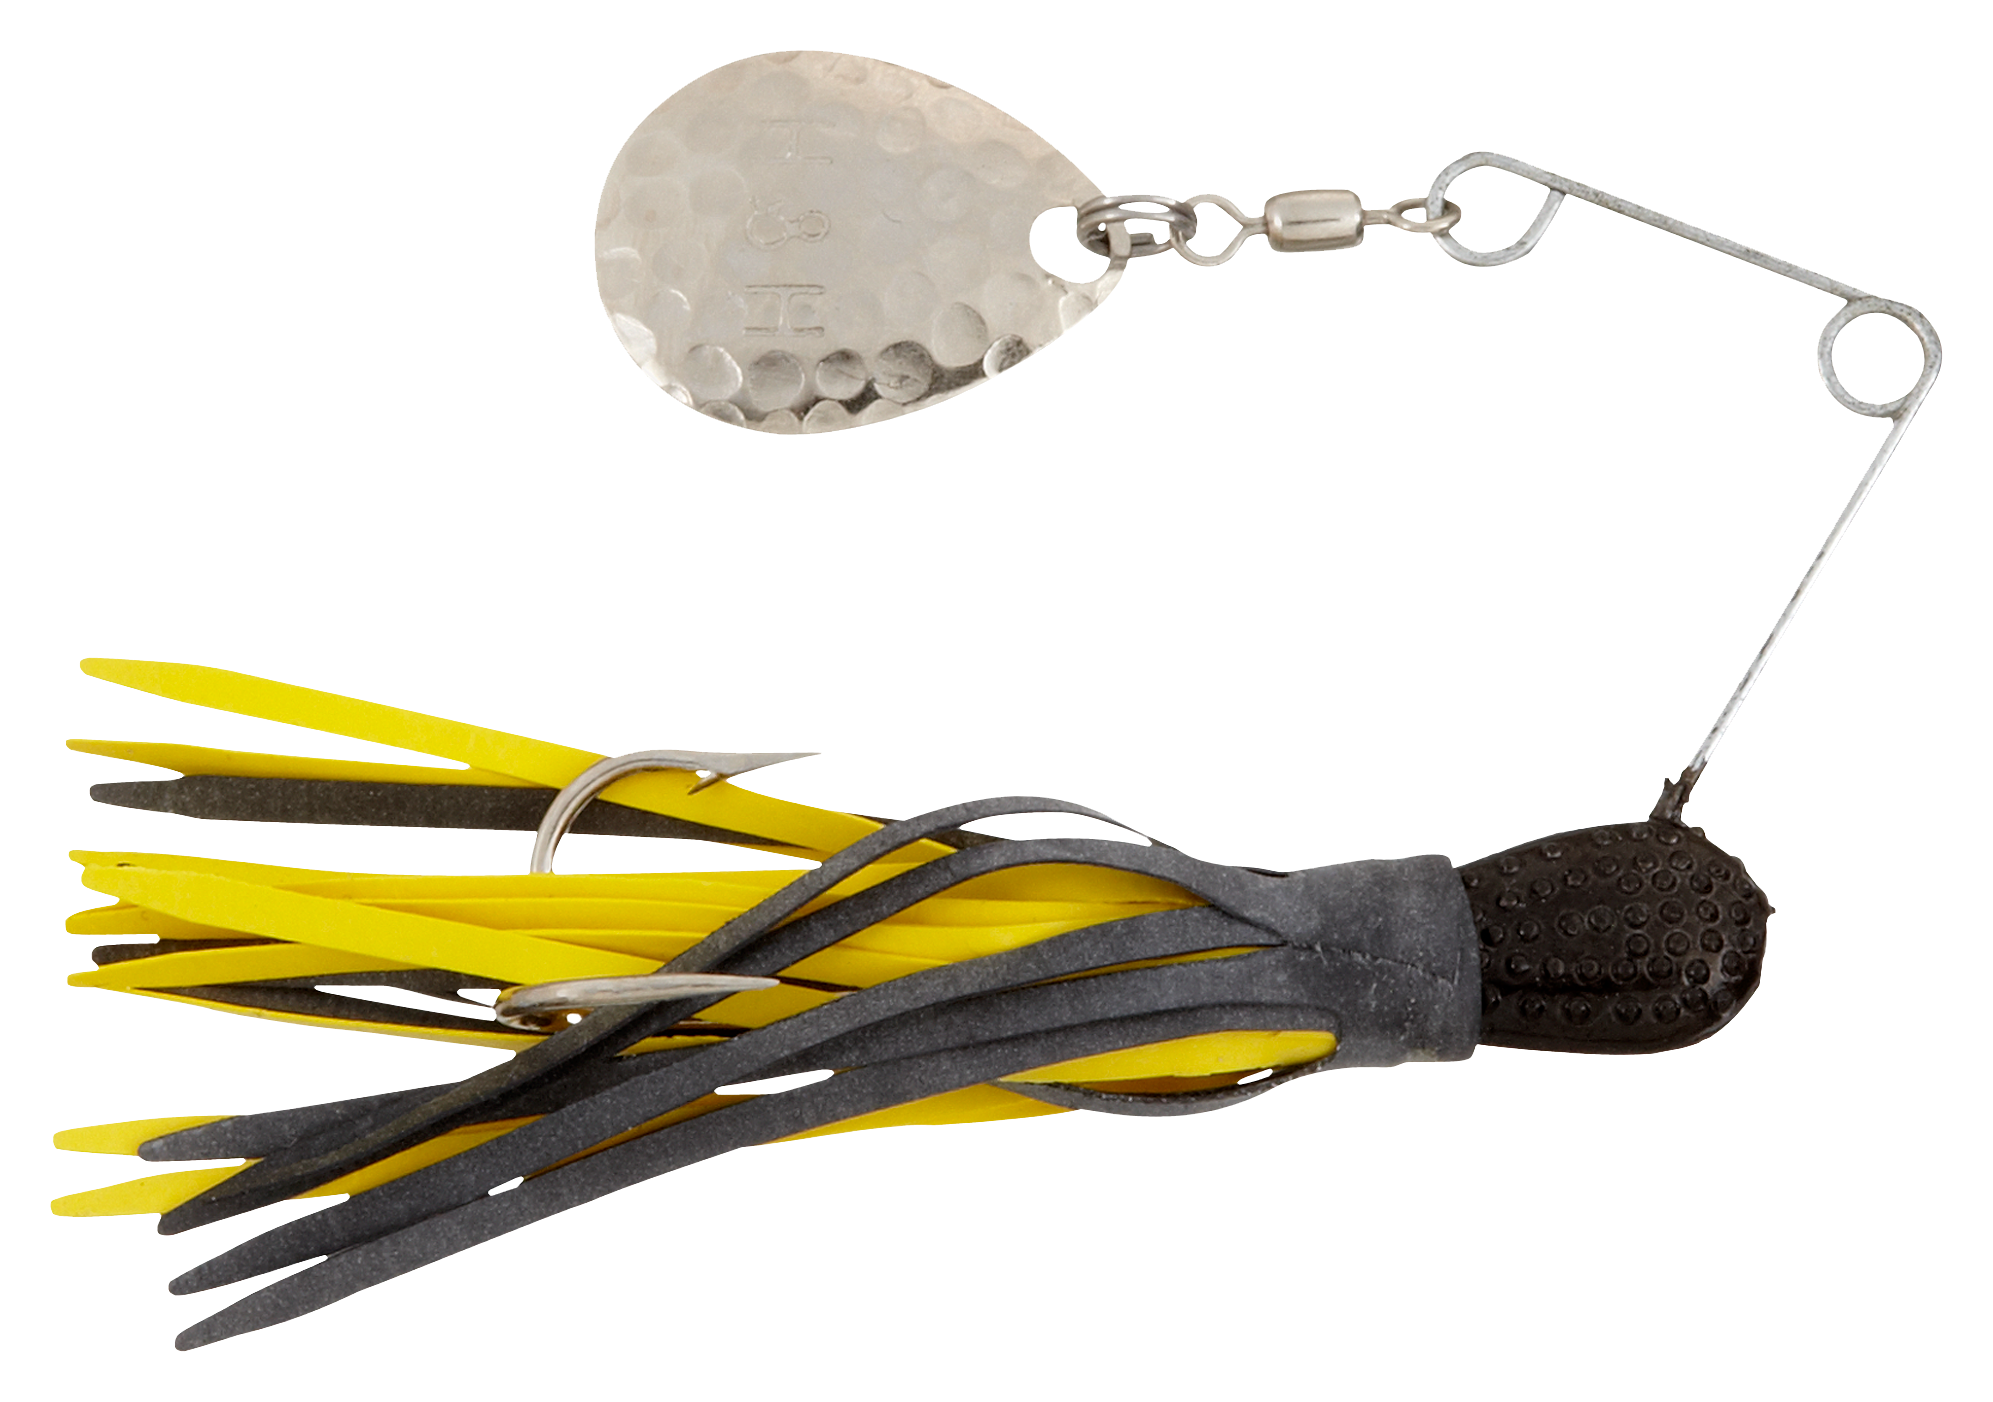 H&H Lure Company Yellow/Black Double Spinner Lure - Shop Patio